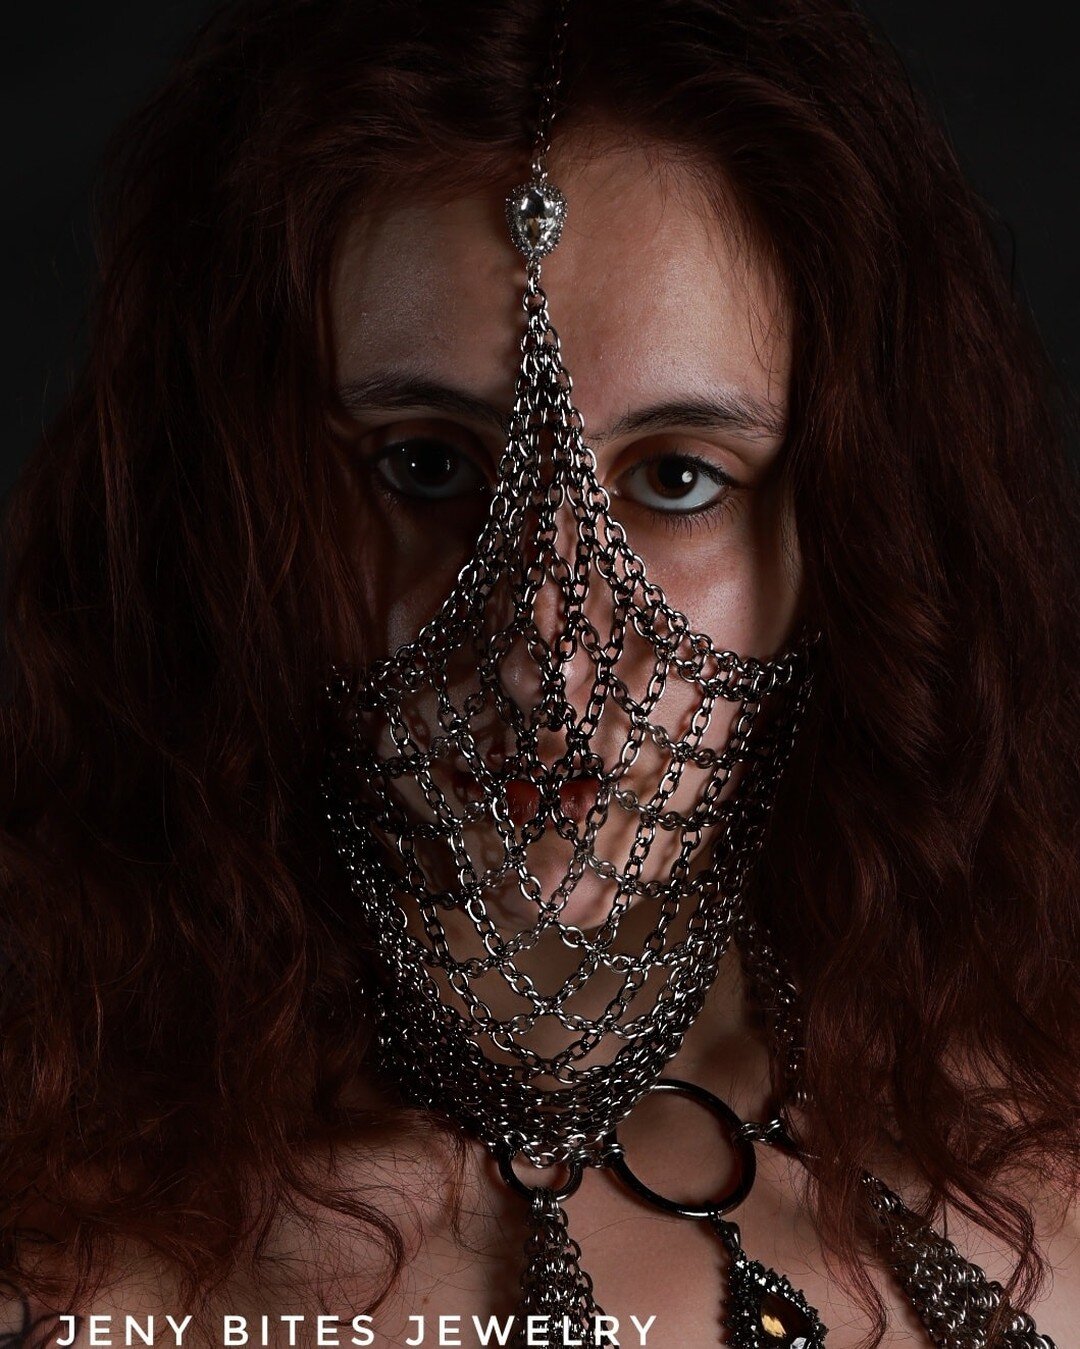 The Sexy kind of mask💋 A diamond veil of steel and gunmetal chains. 

Get your shopping done early with awesome Discounts and Free Shipping going on right now!!
Save 10% - 15% - 20% OFF see our website for details!

https://www.jenybitesjewelry.com
